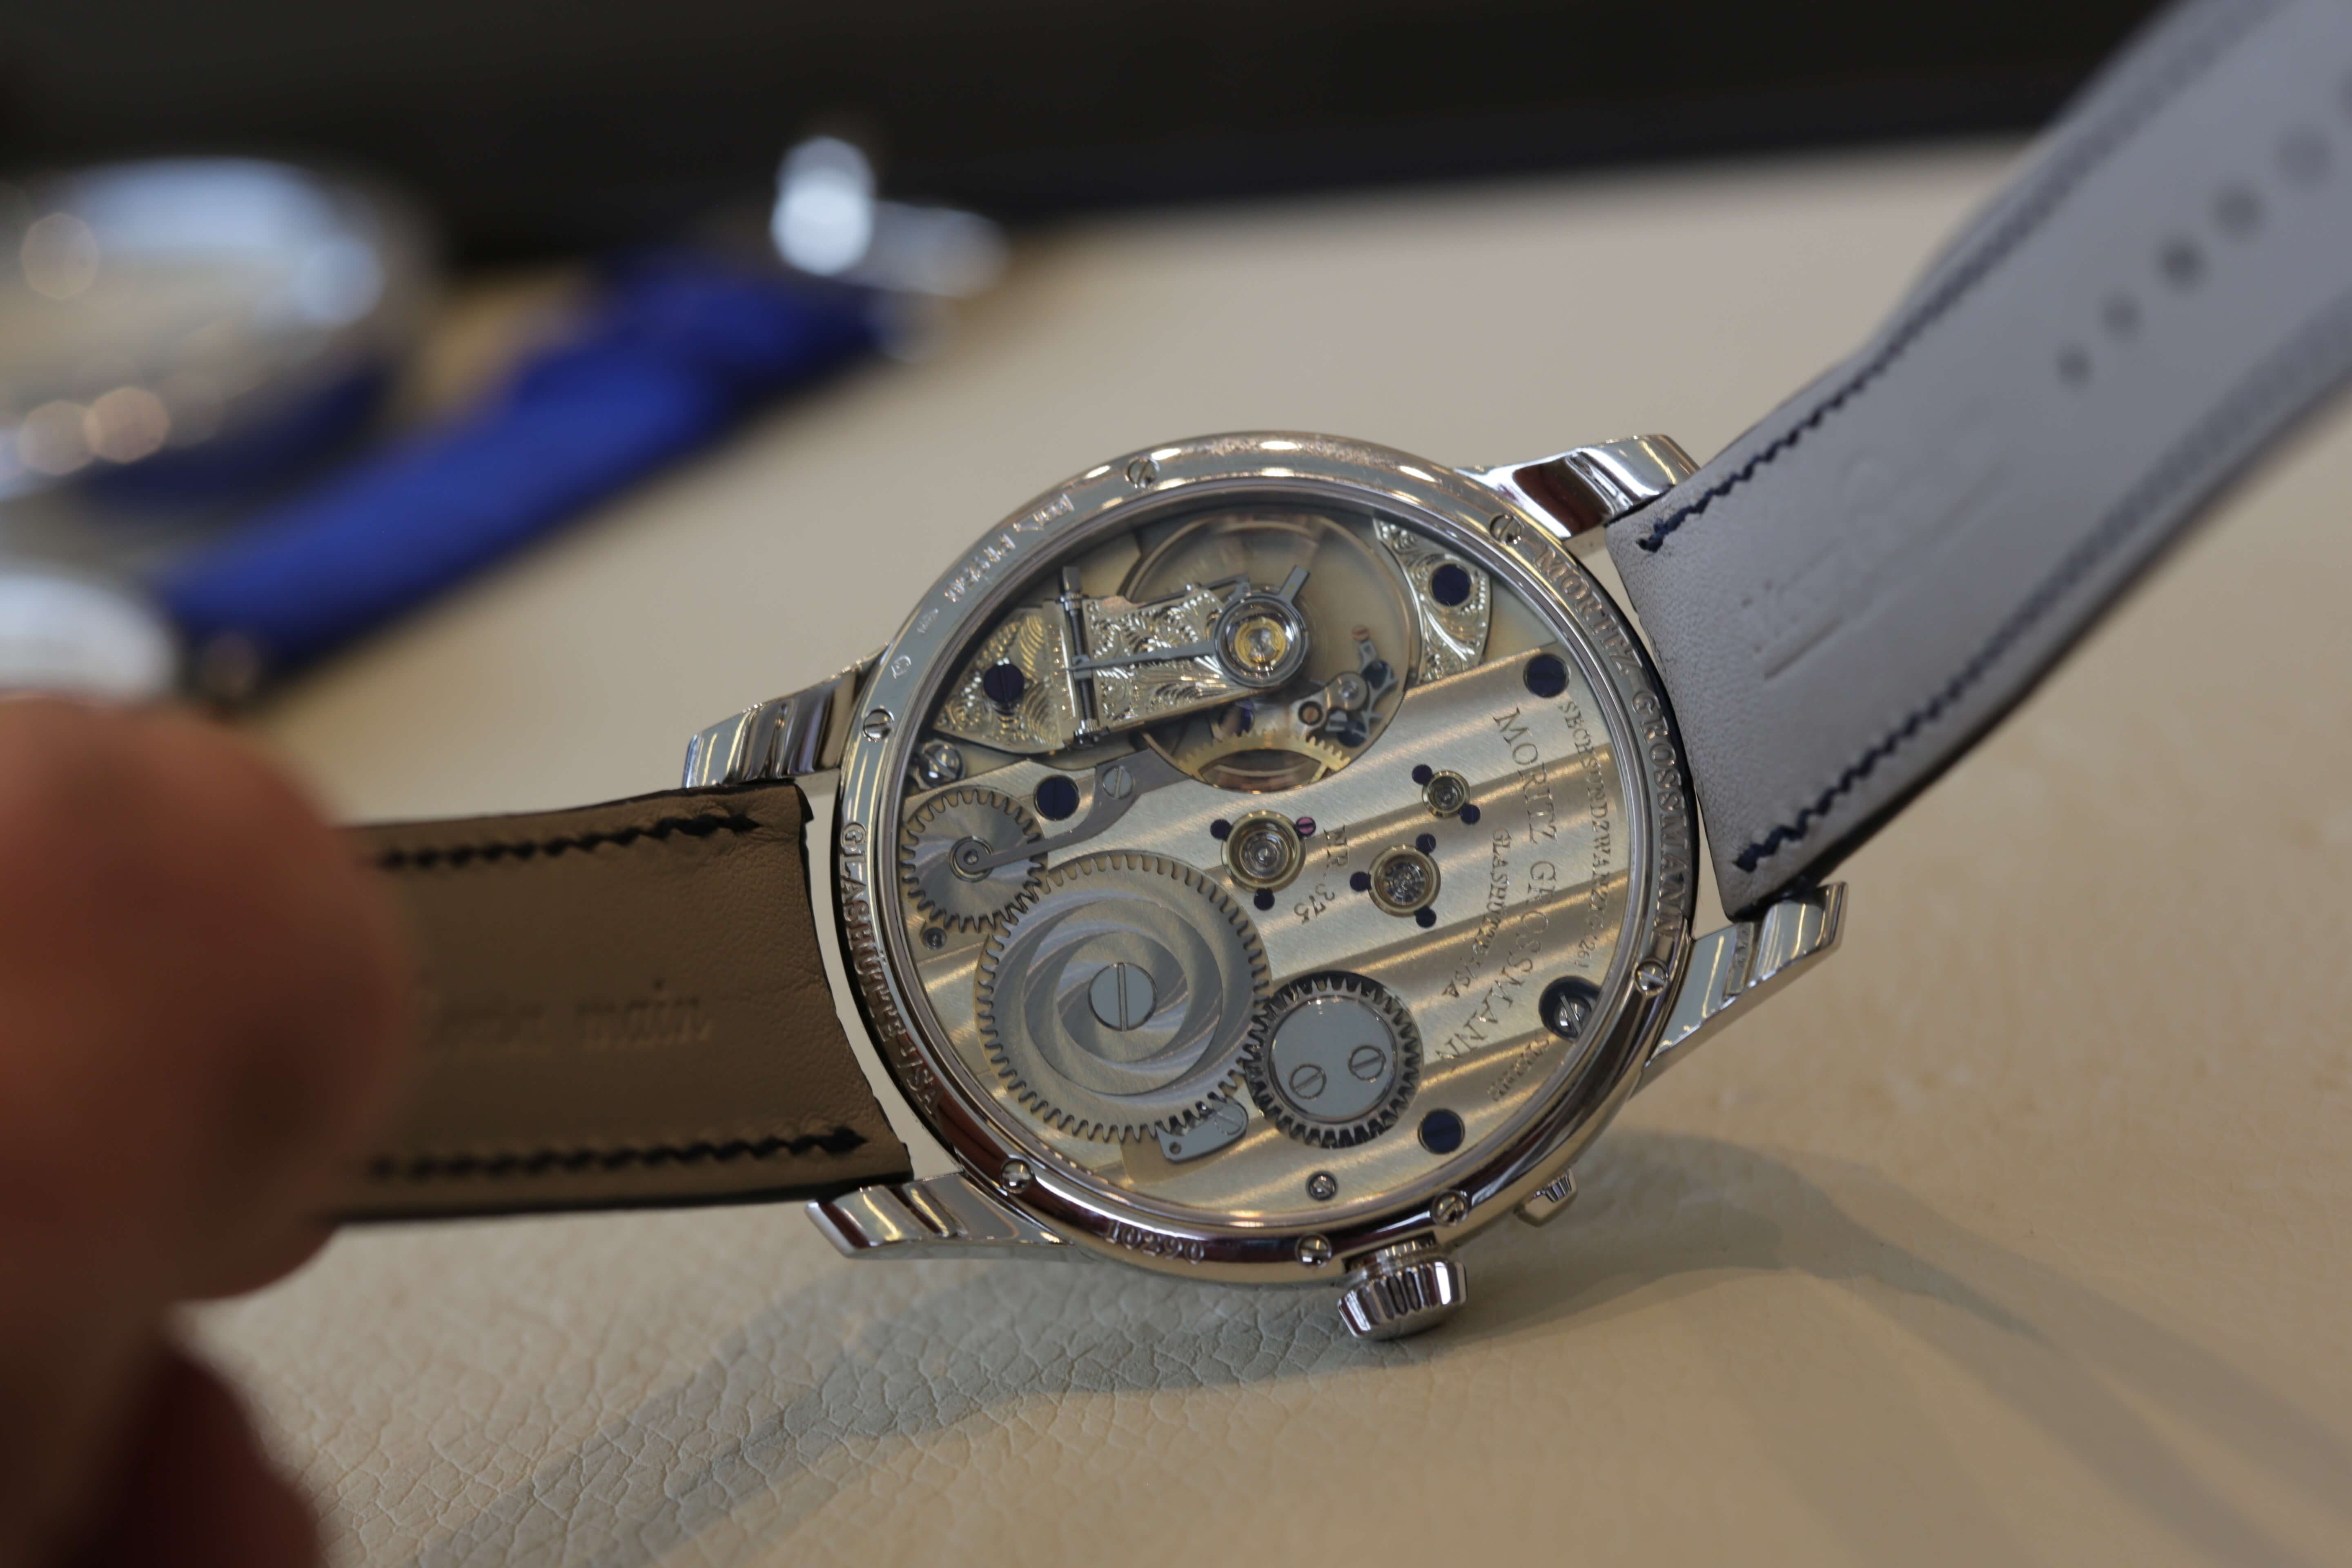 Impeccably hand finished Moritz Grossmann movement visible through the display back